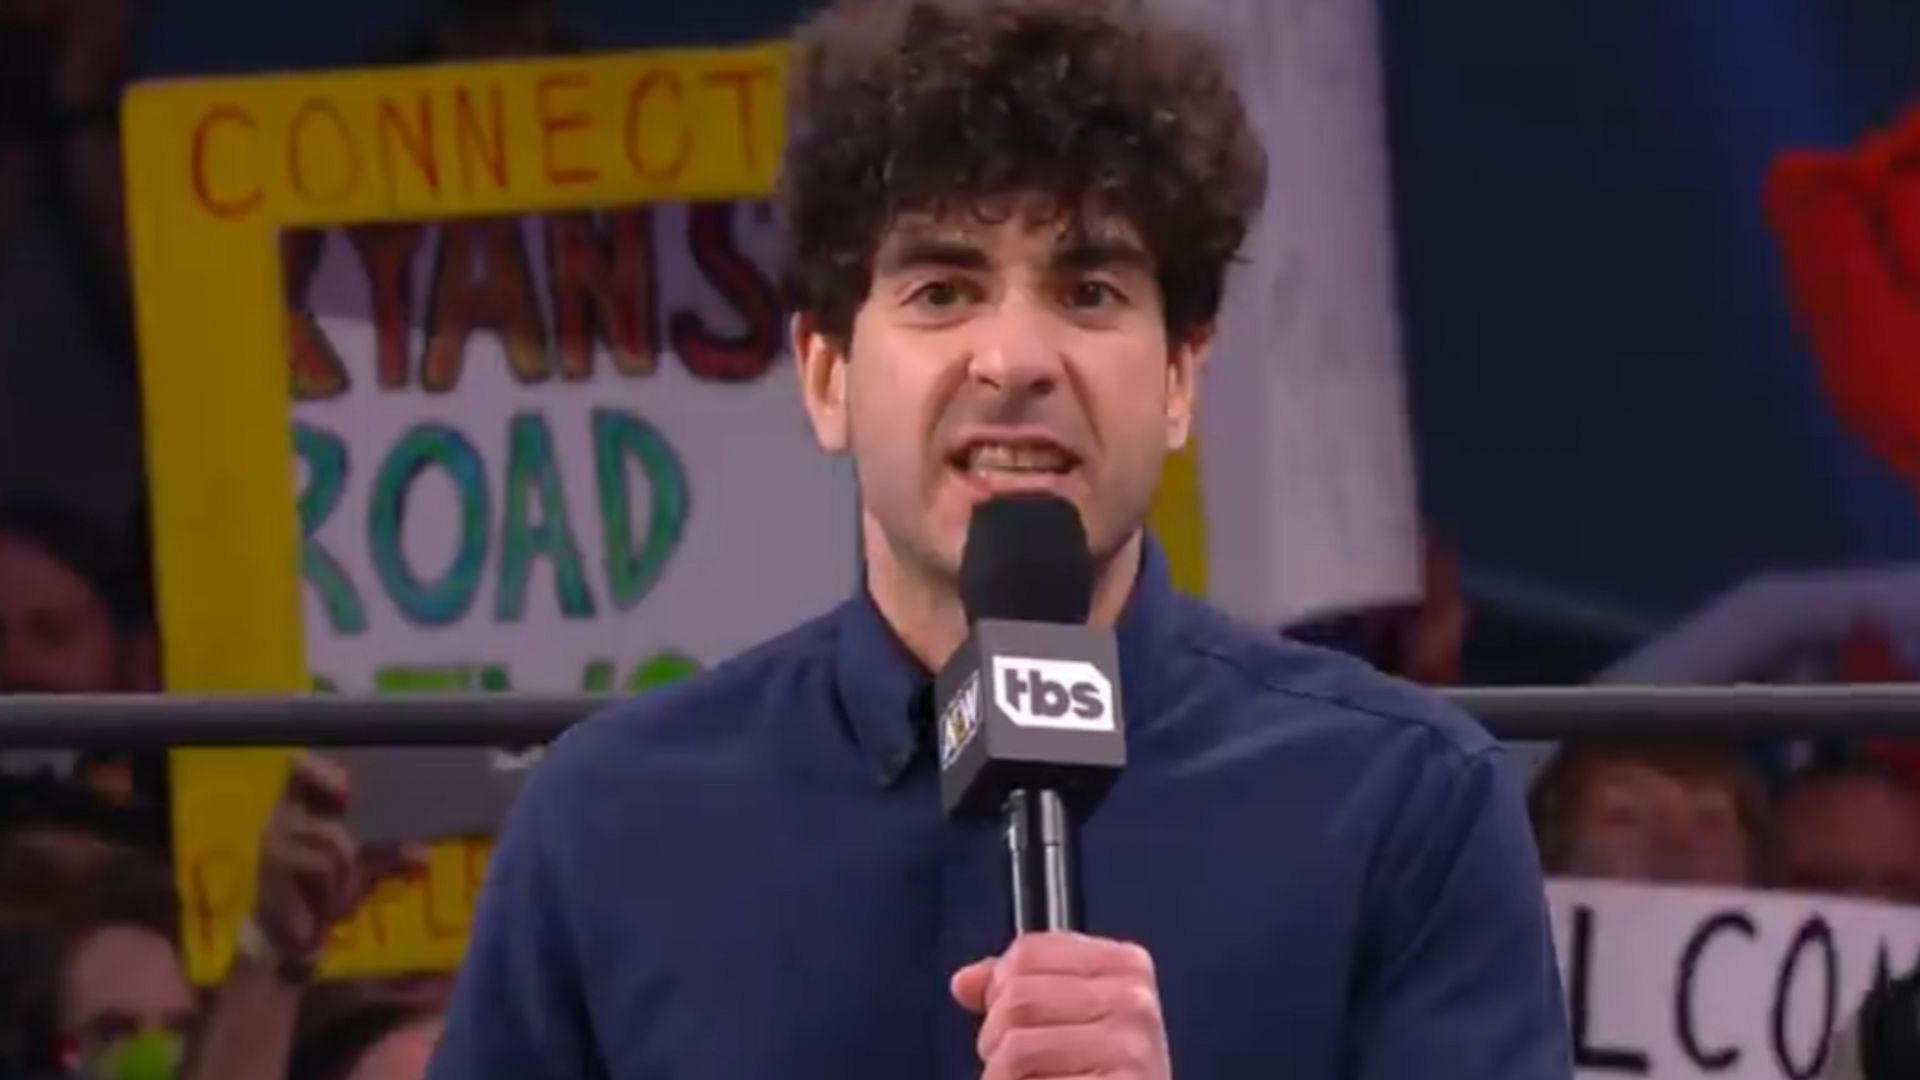 Tony Khan is the CEO of AEW and ROH